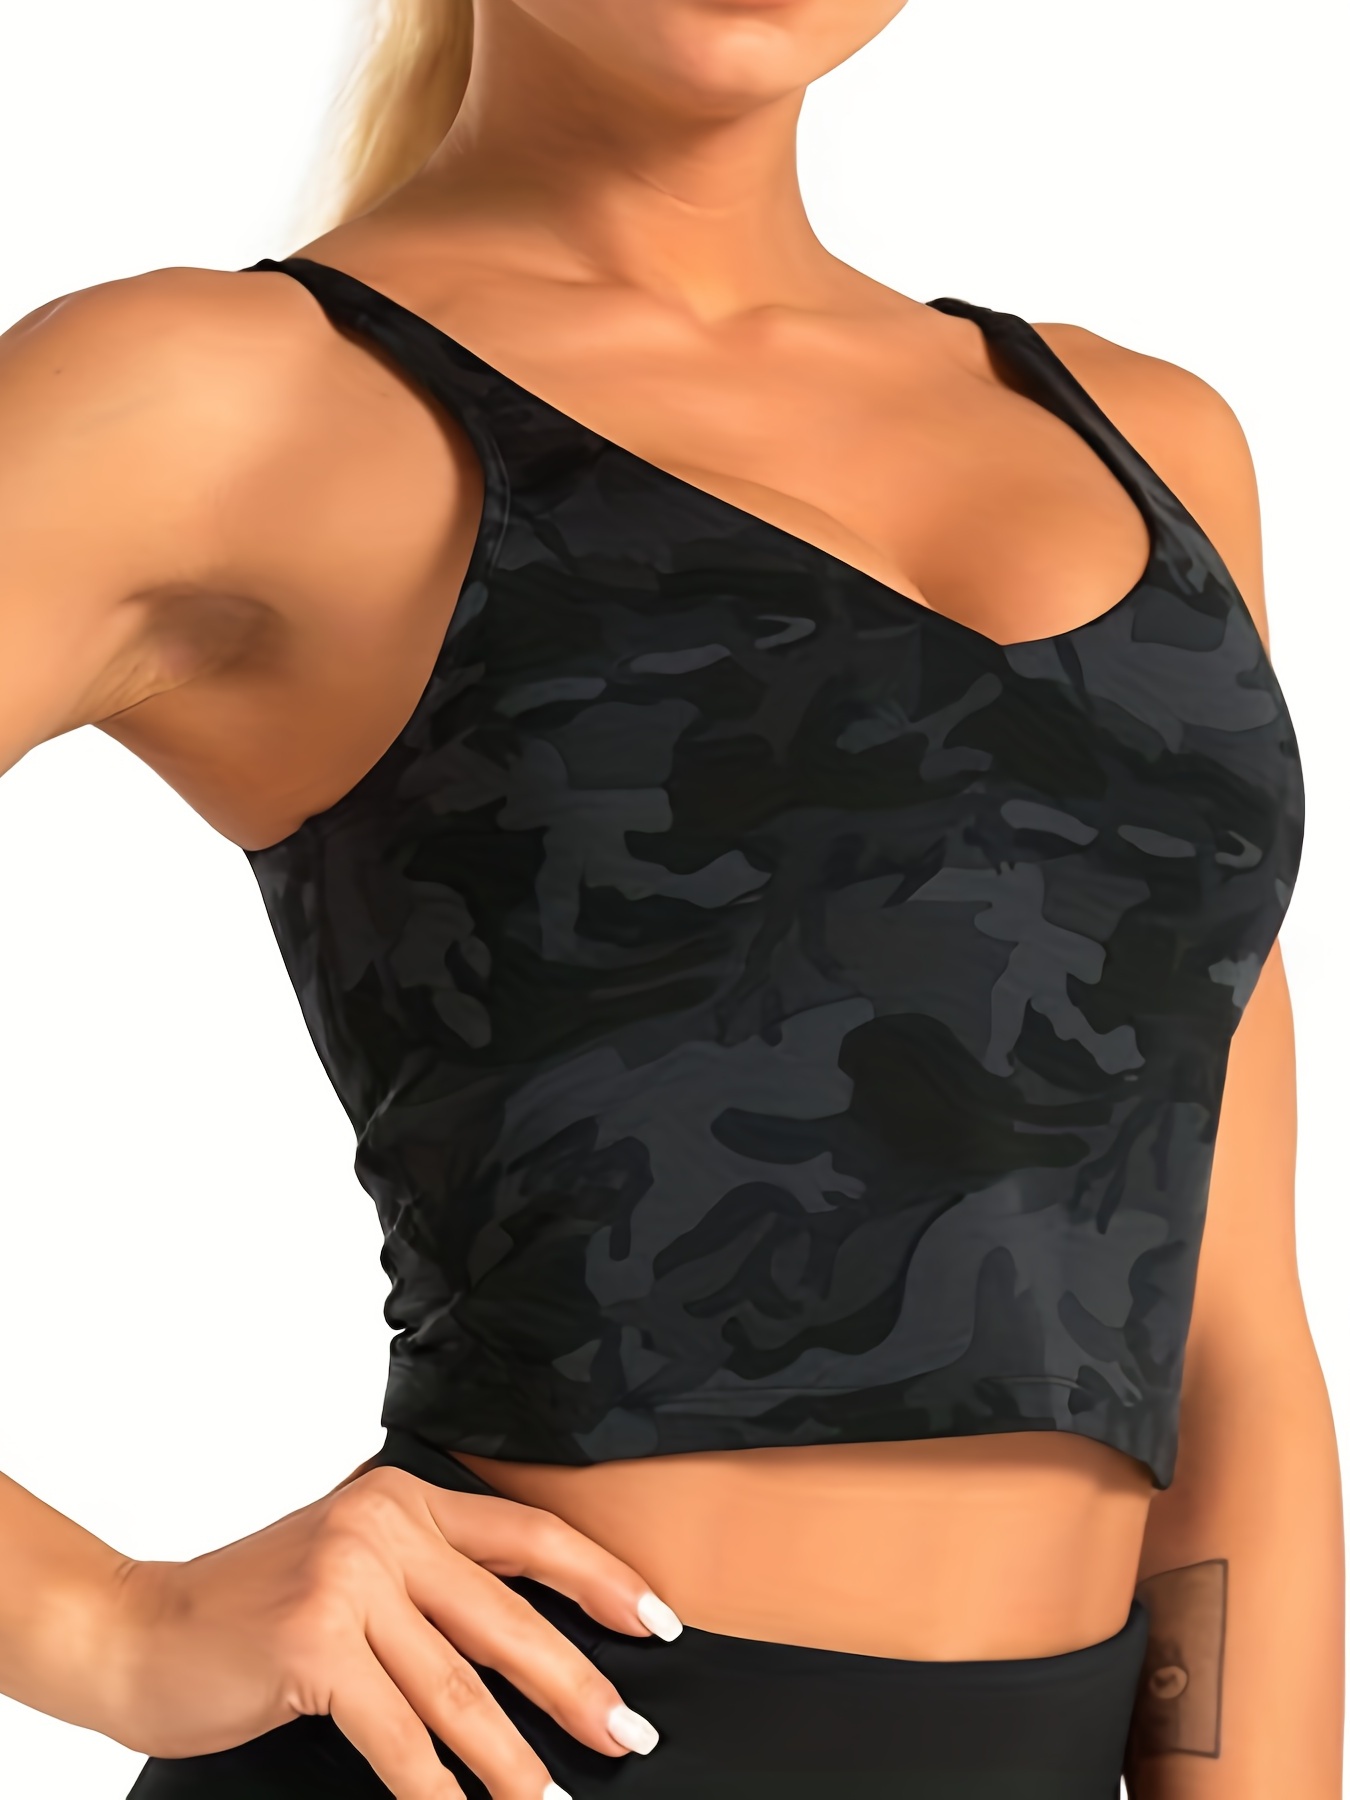 THE GYM PEOPLE Women's Medium Support Sports Bra Removable Padded  Sleeveless Workout Crop Tops Black at  Women's Clothing store